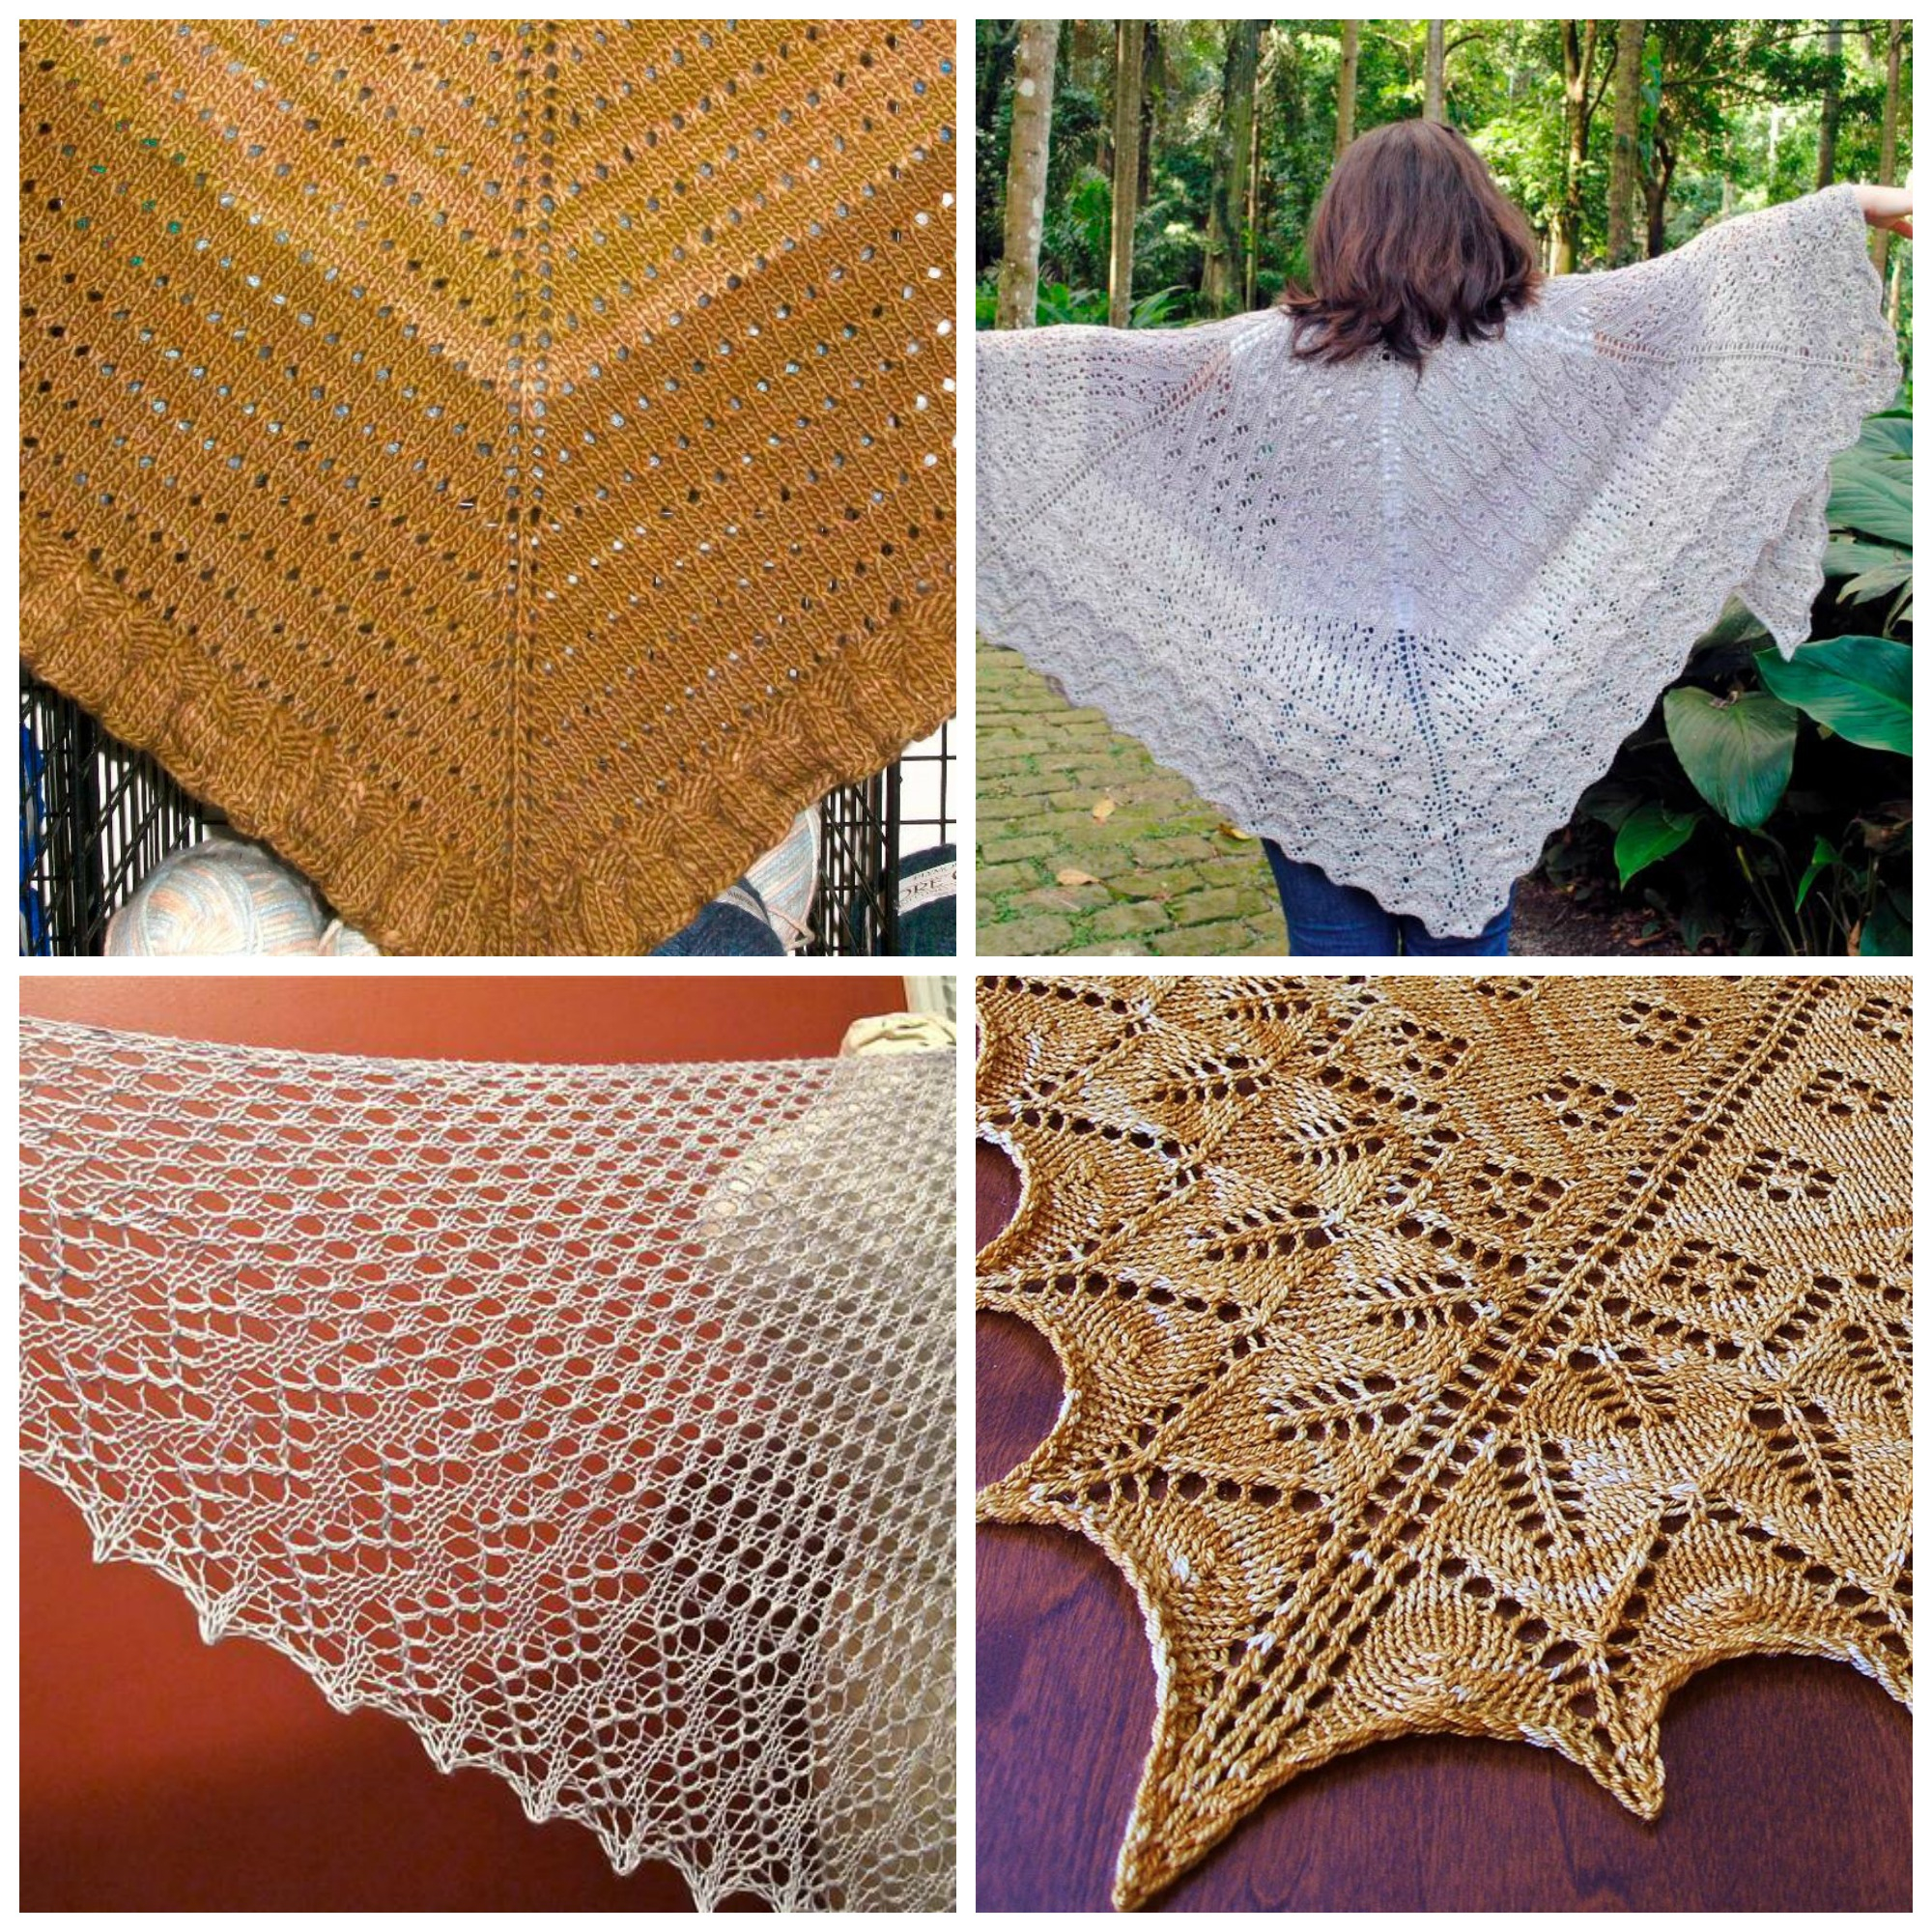 Free Patterns For Knitted Shawls 5 Free Knitting Pattern Books With Over 25 Free Patterns